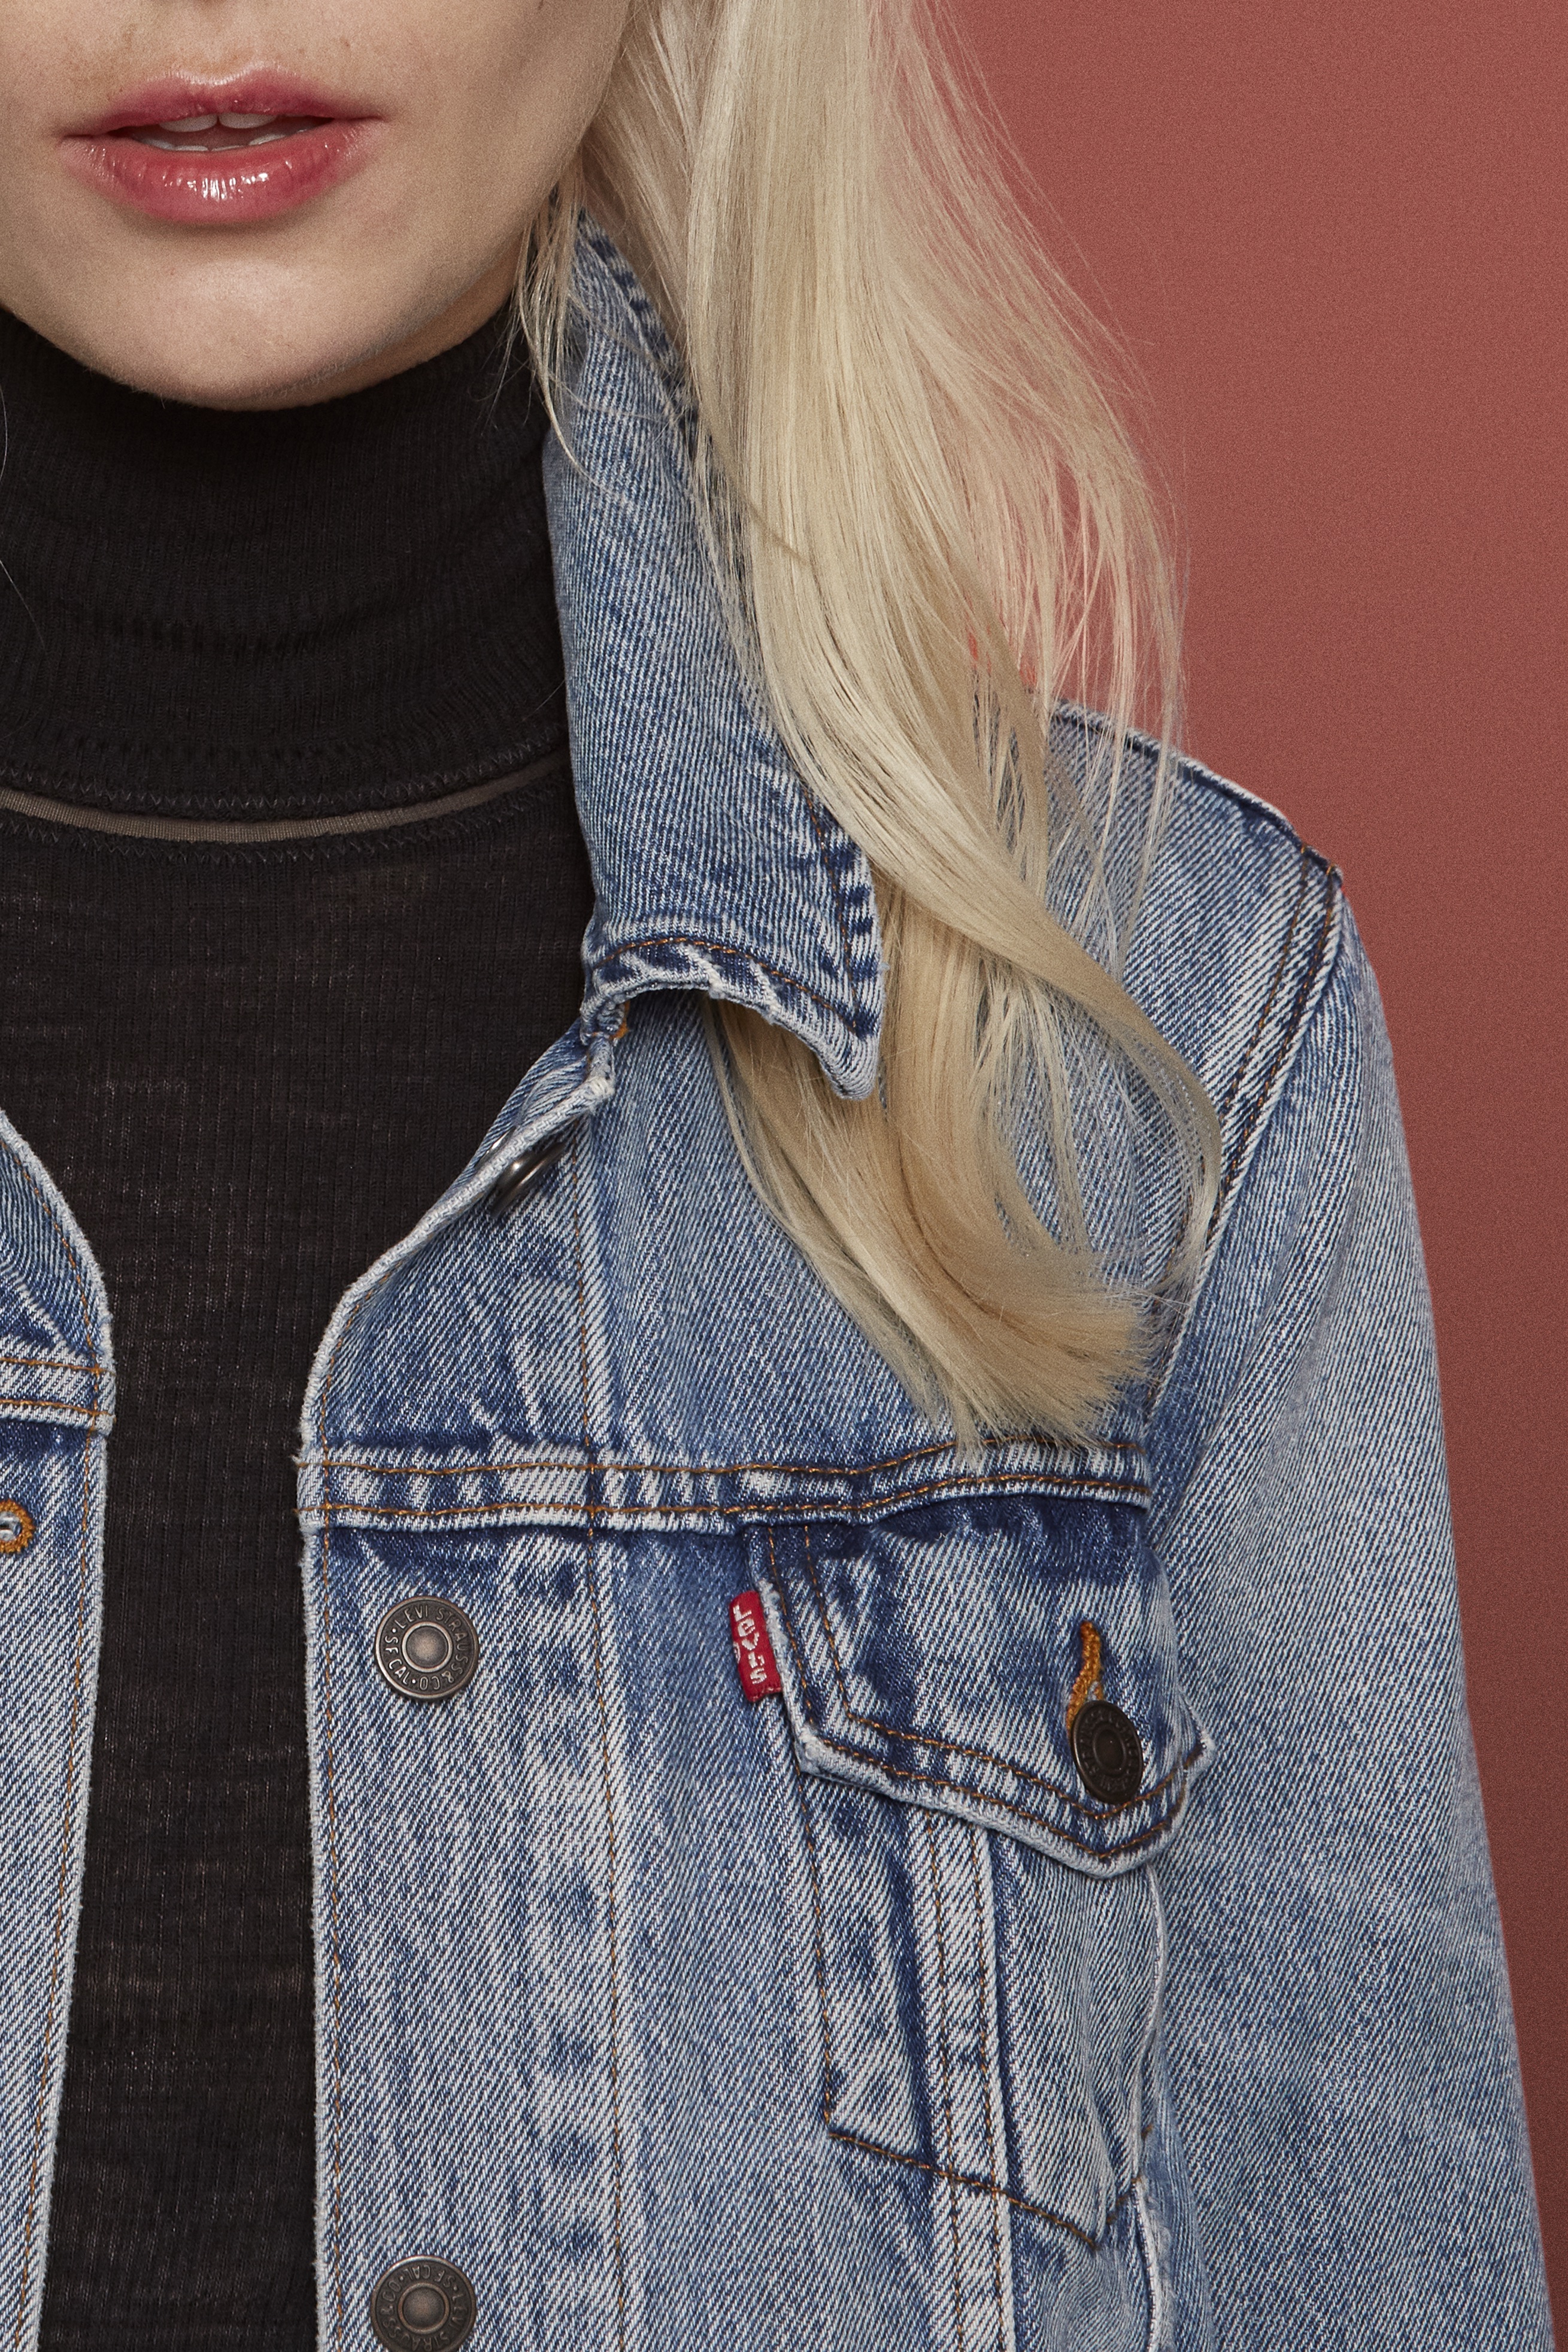 Woman with blonde hair, denim jacket, and black turtle neck.